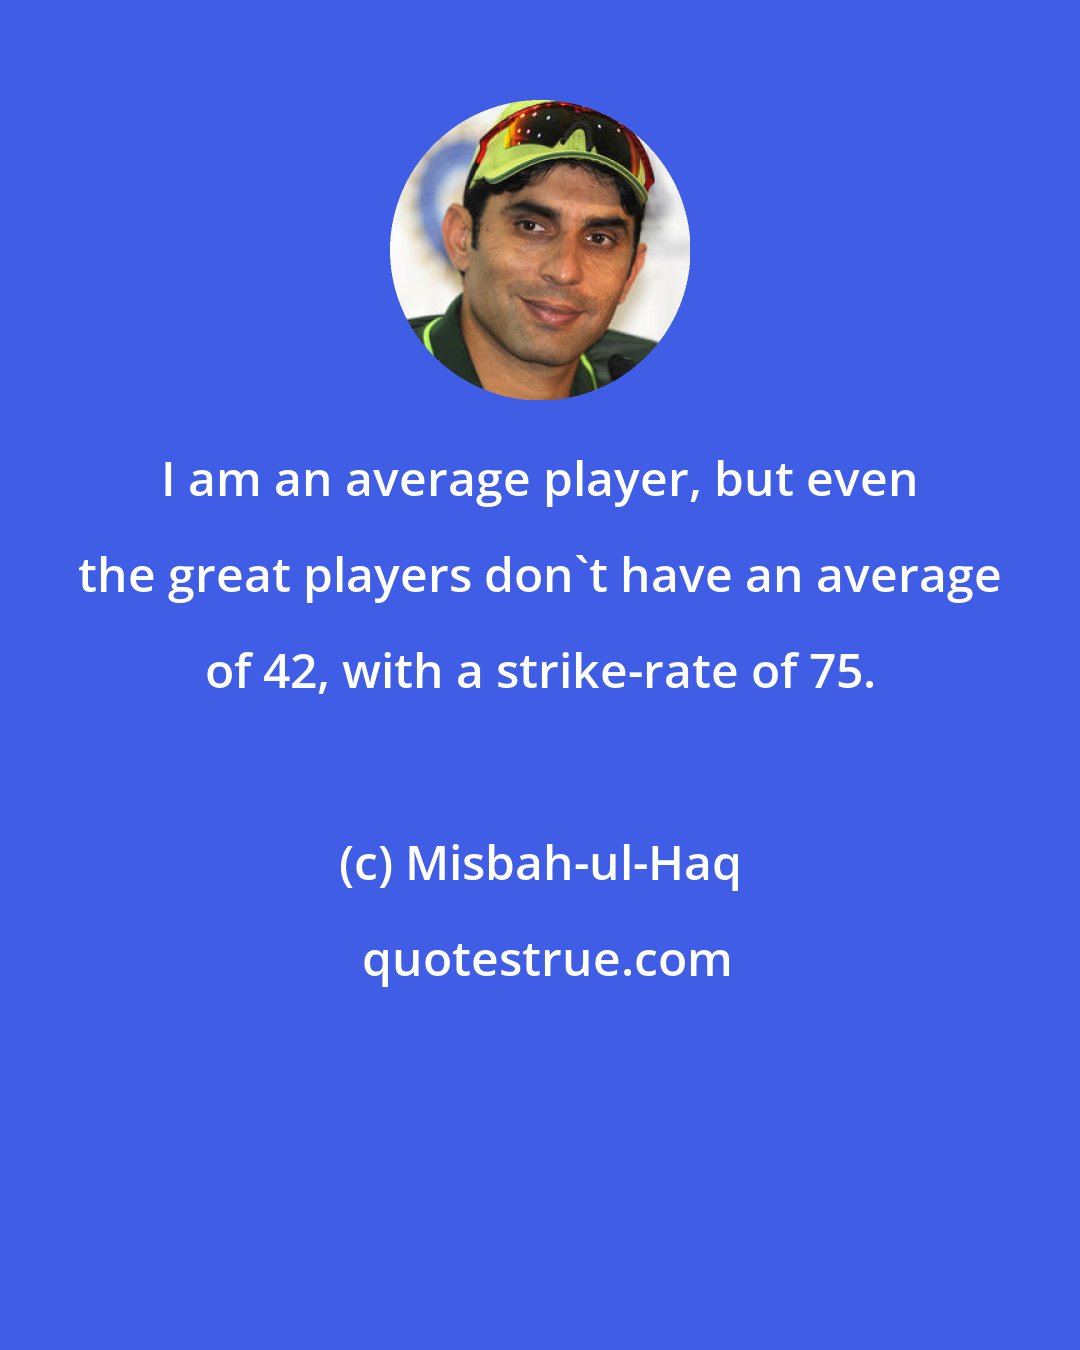 Misbah-ul-Haq: I am an average player, but even the great players don't have an average of 42, with a strike-rate of 75.